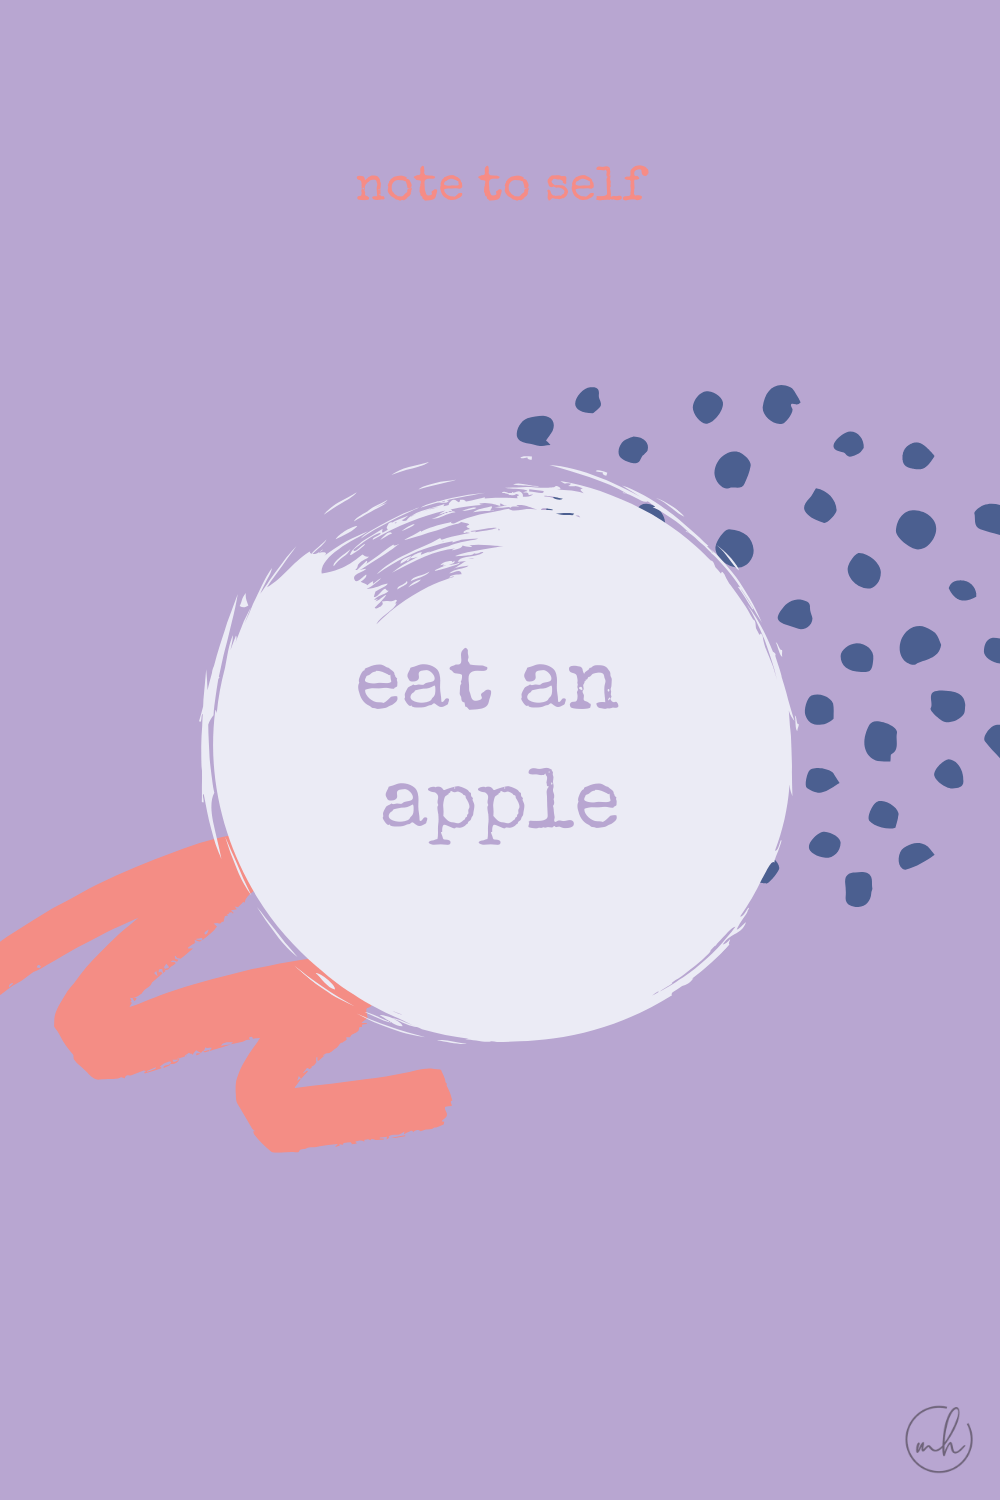 Eat an apple - Note to self quotes | myhoogah